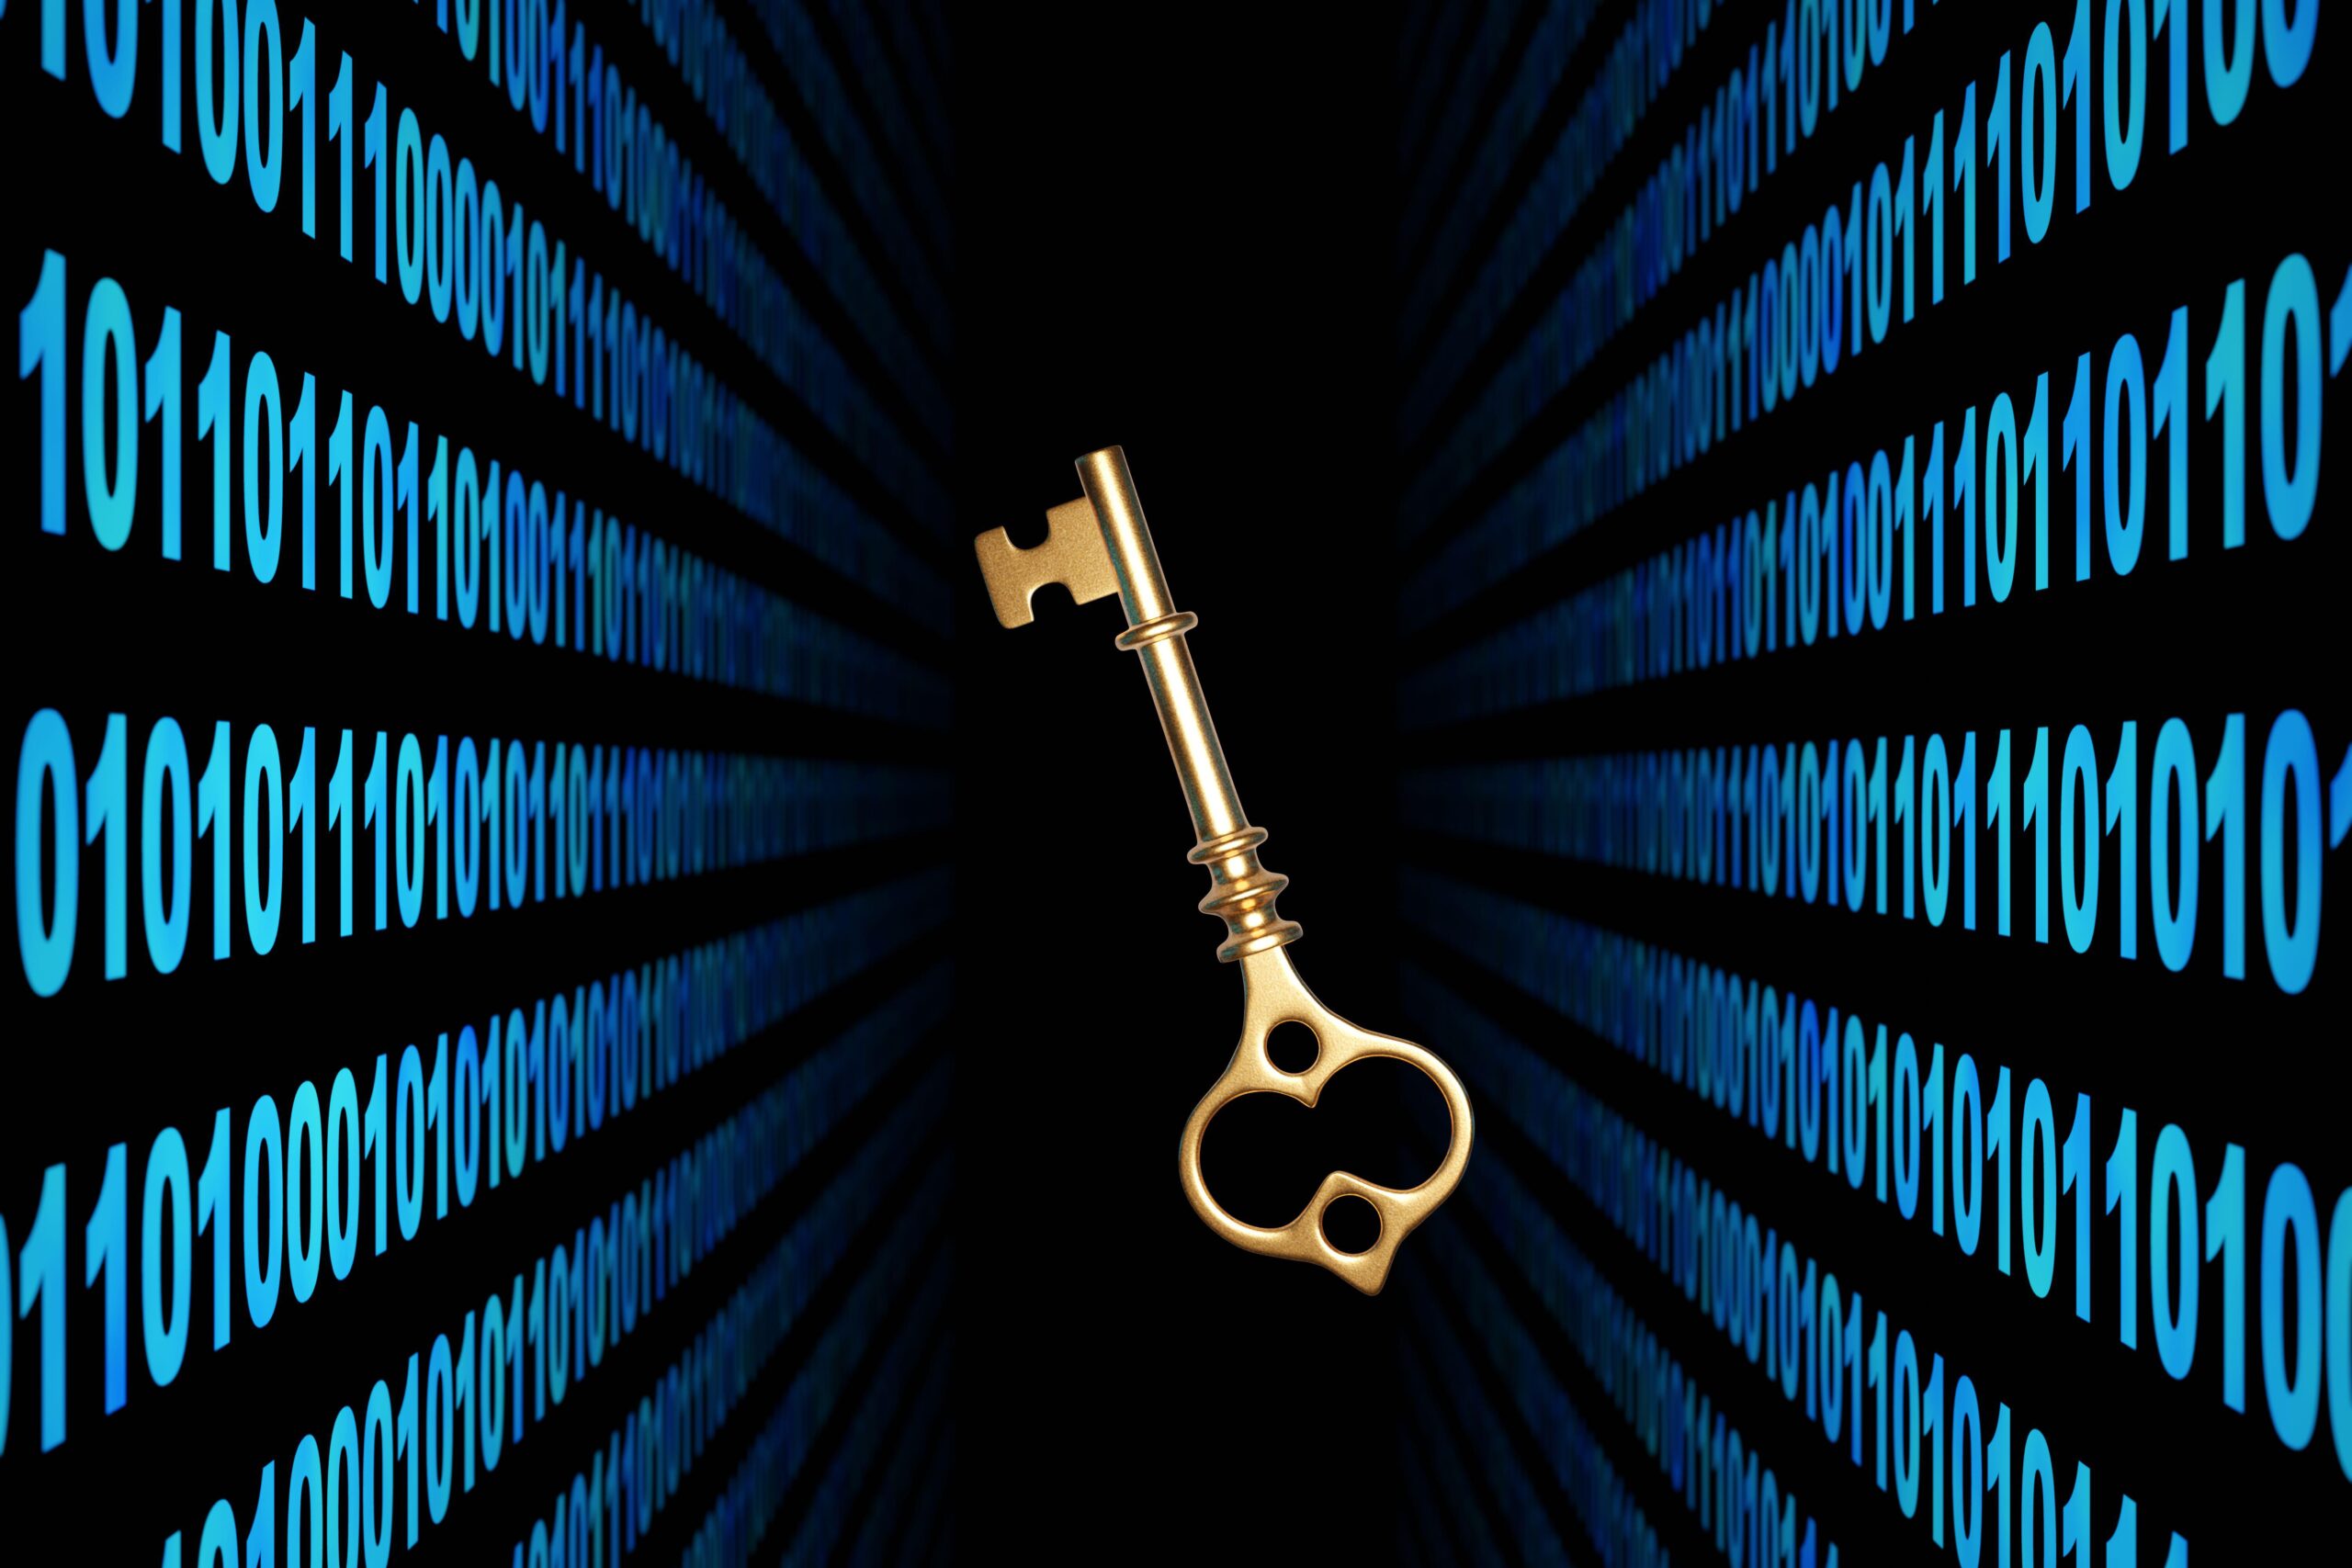 Key Group Ransomware Foiled by New Decryptor – Source: www.darkreading.com